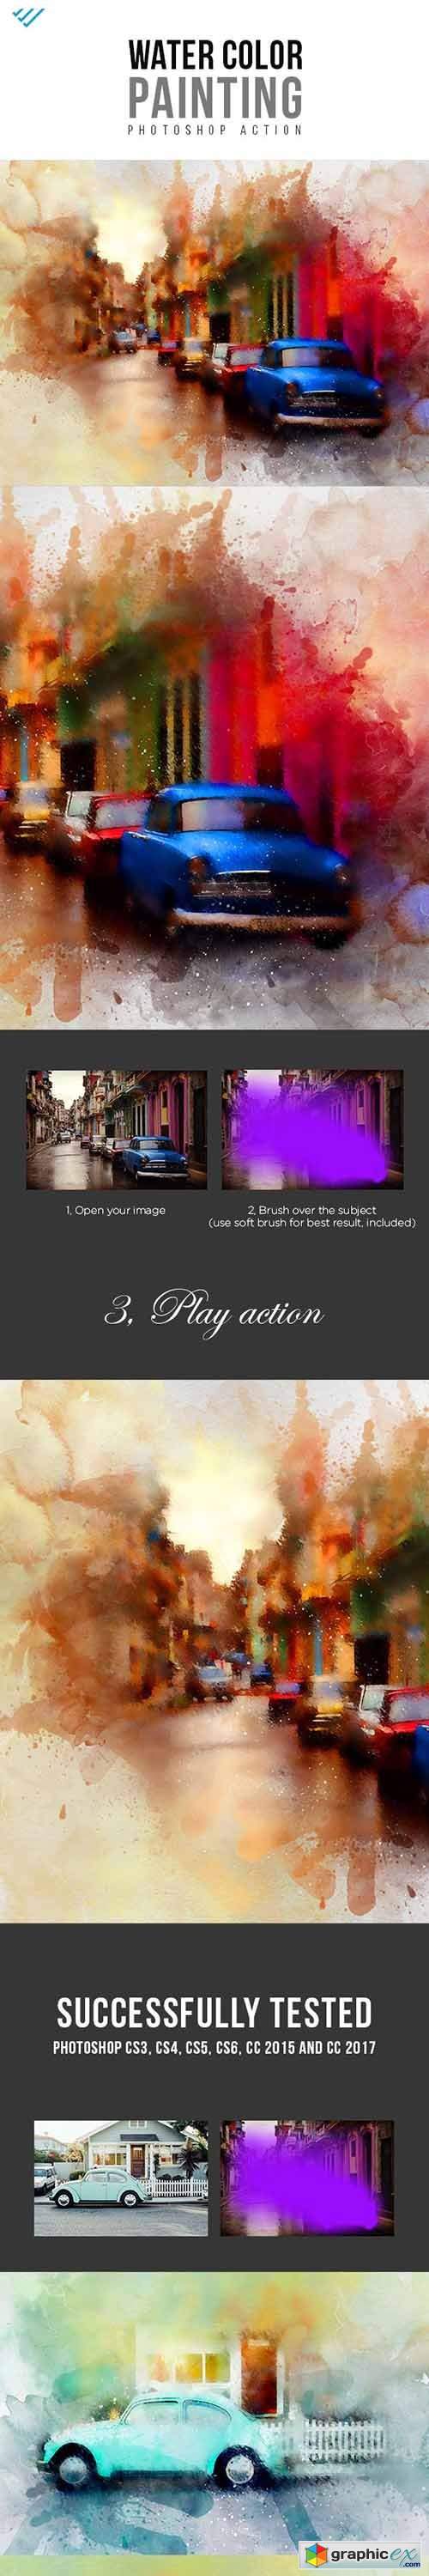 Water Color Painting Photoshop Action 18707132